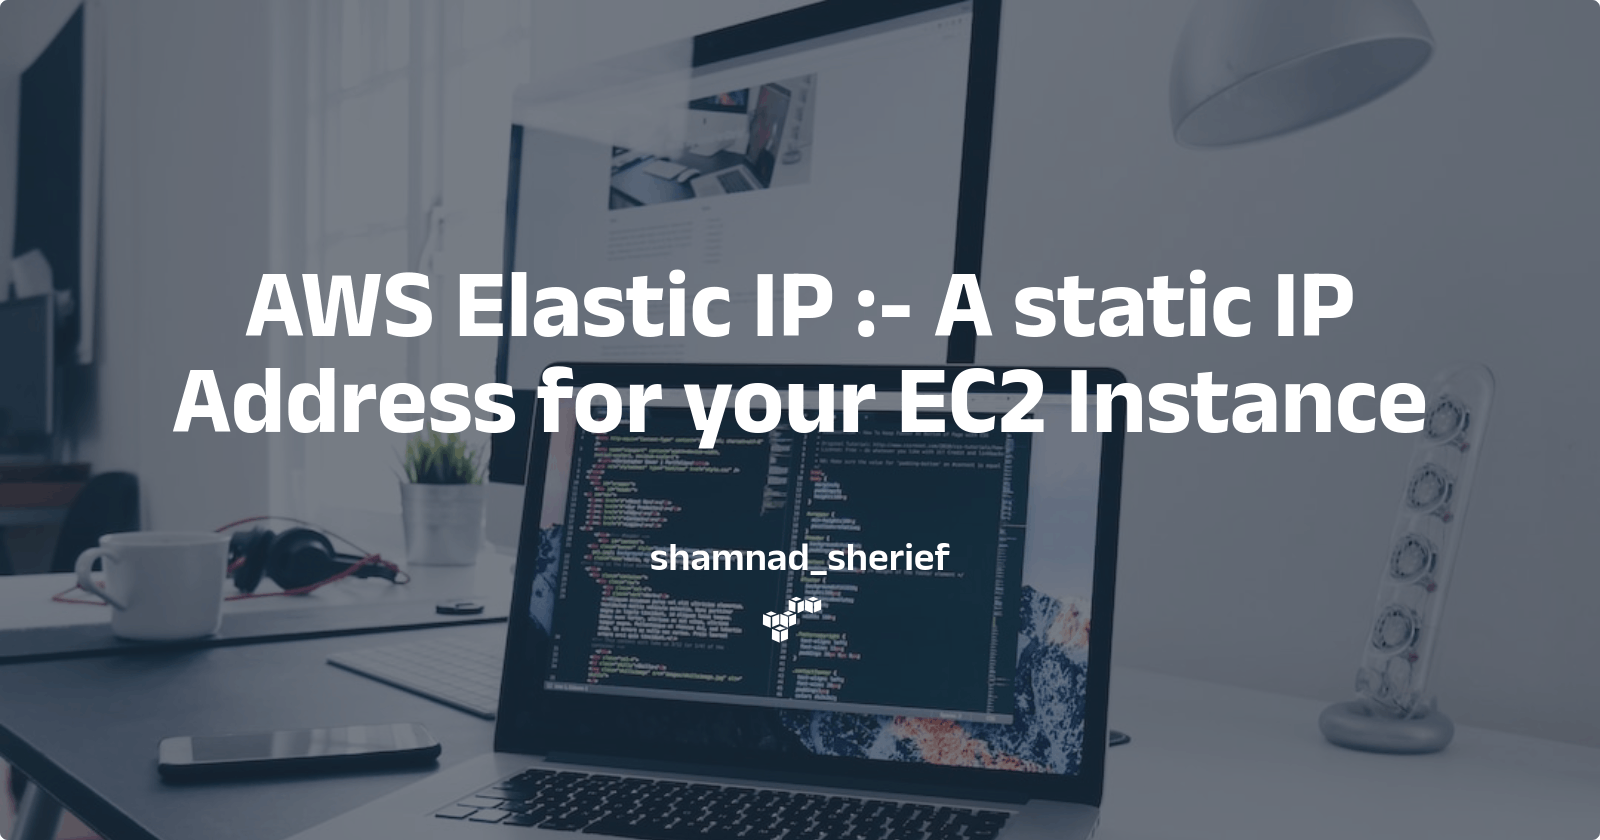 Get a Static IP Address for your AWS EC2 Instance